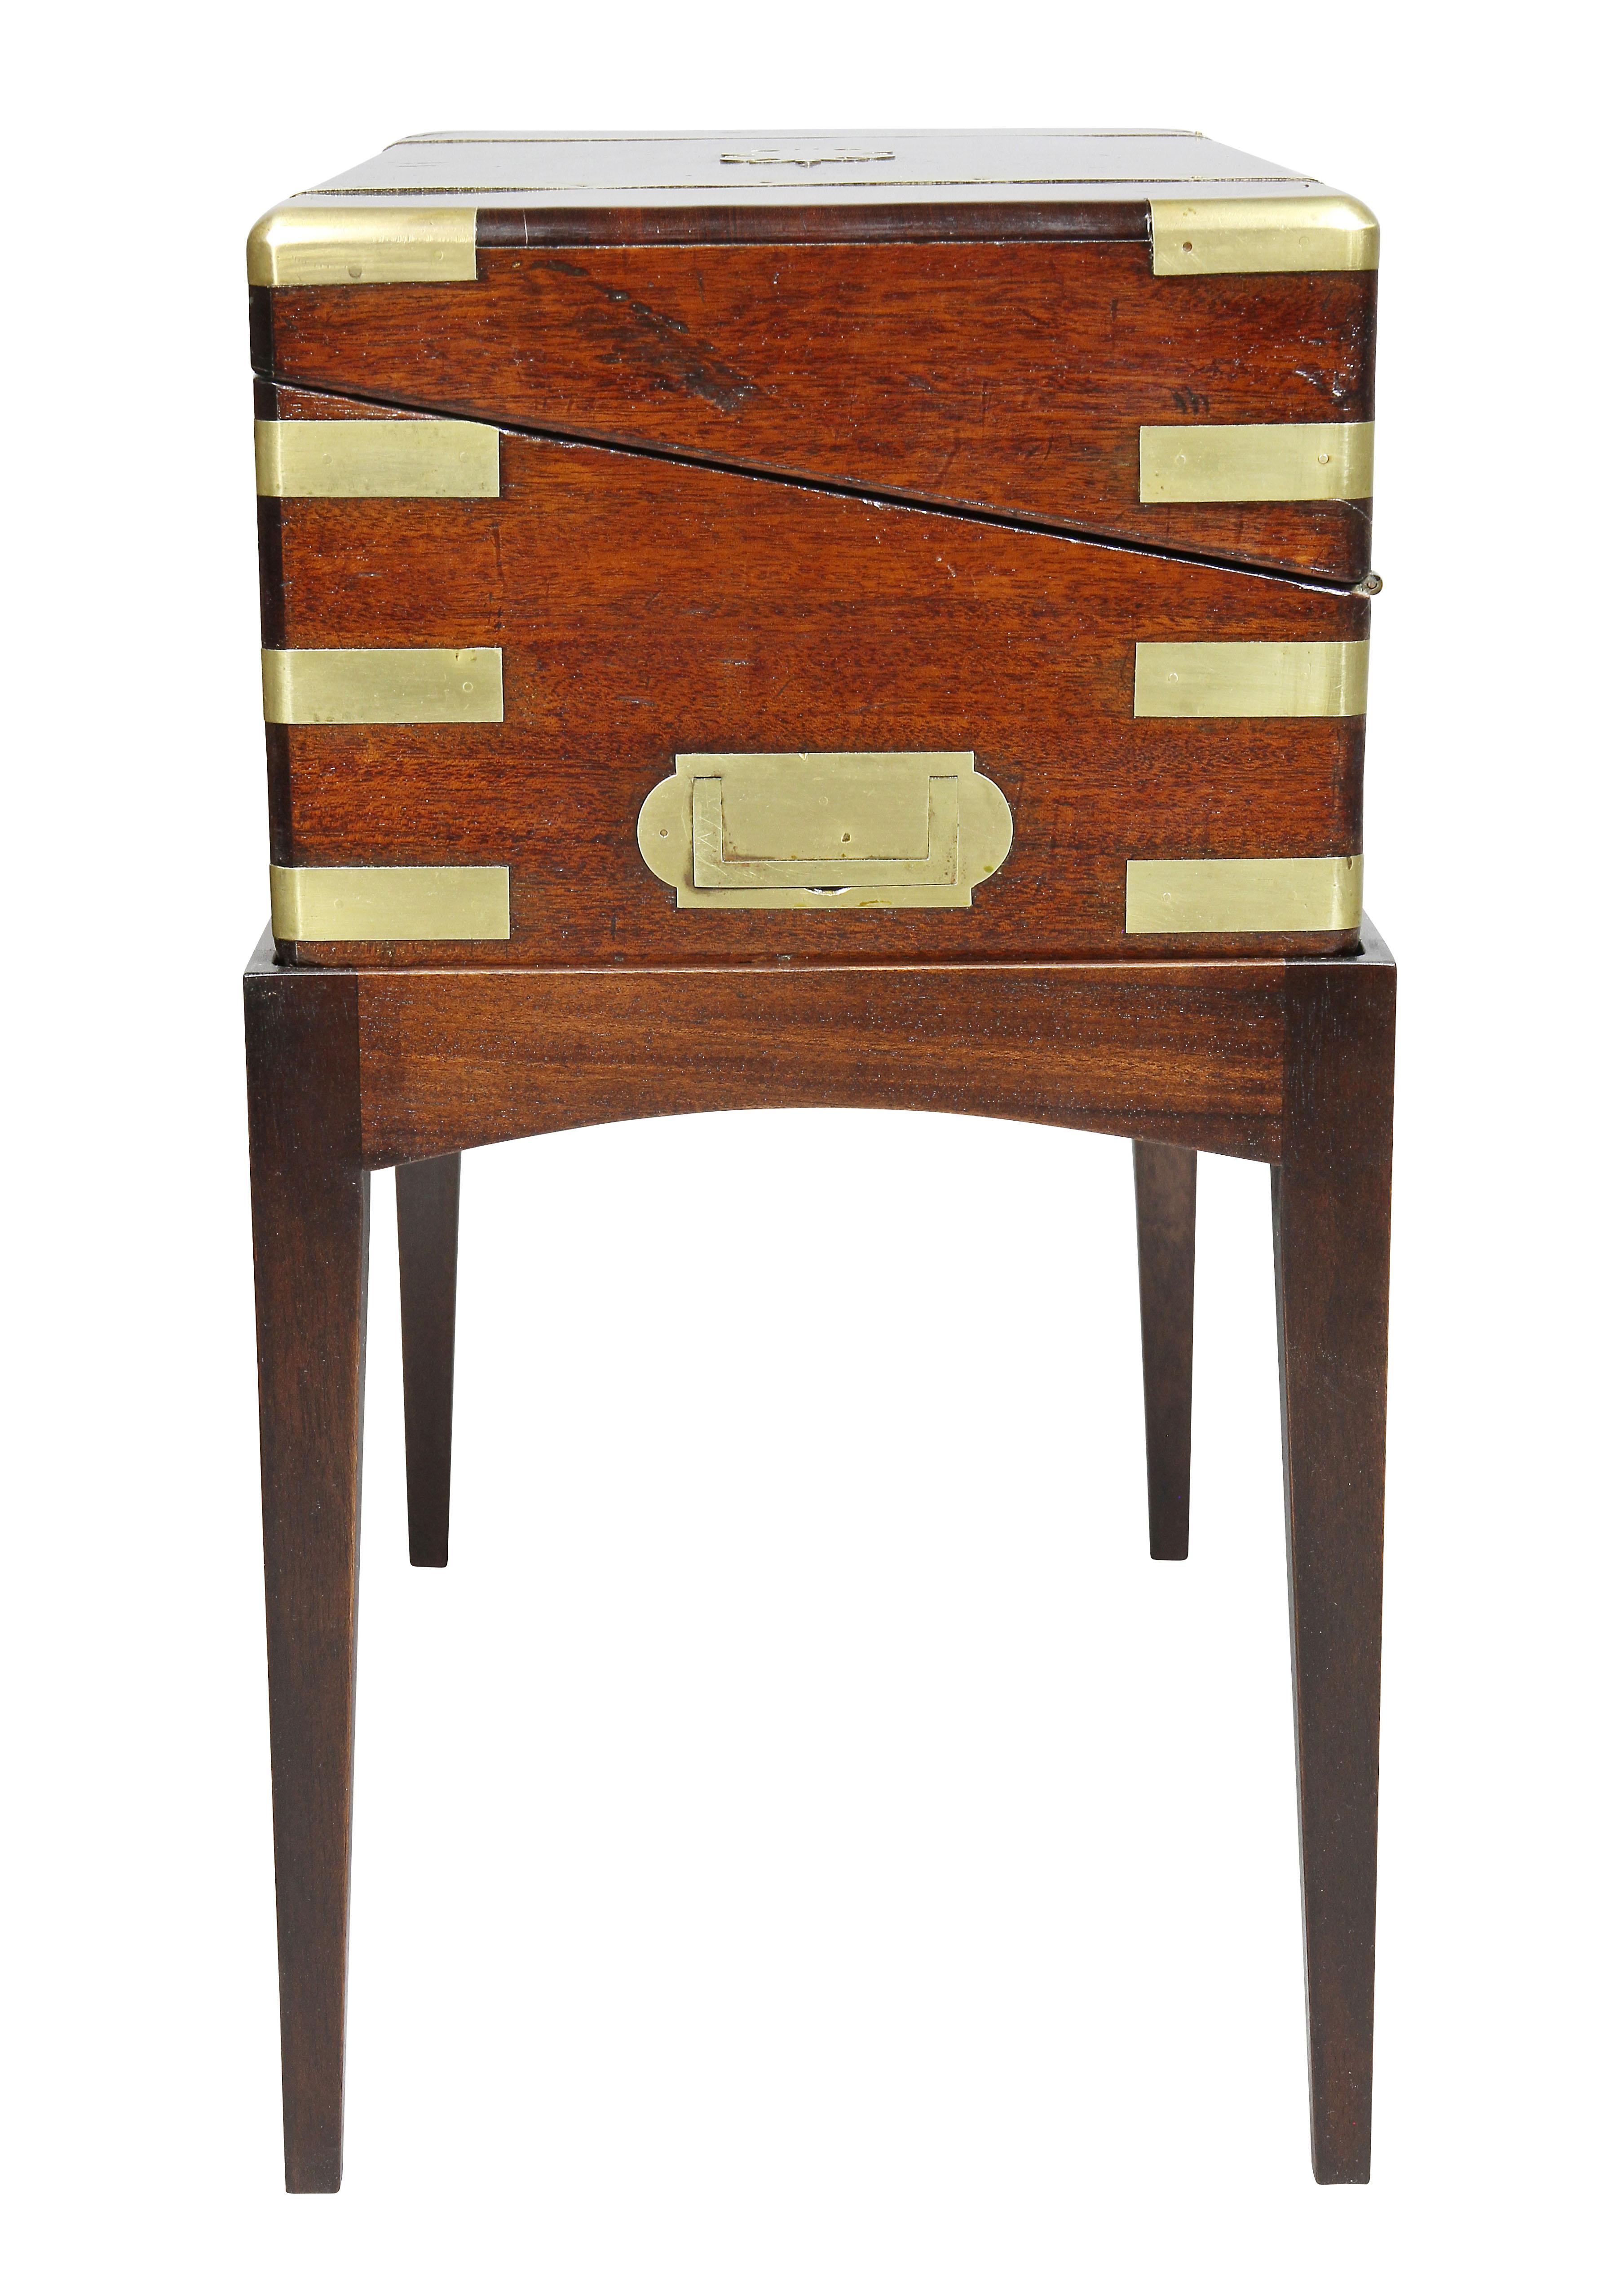 Late Regency Rosewood and Brass Mounted Lap Desk on Stand 3